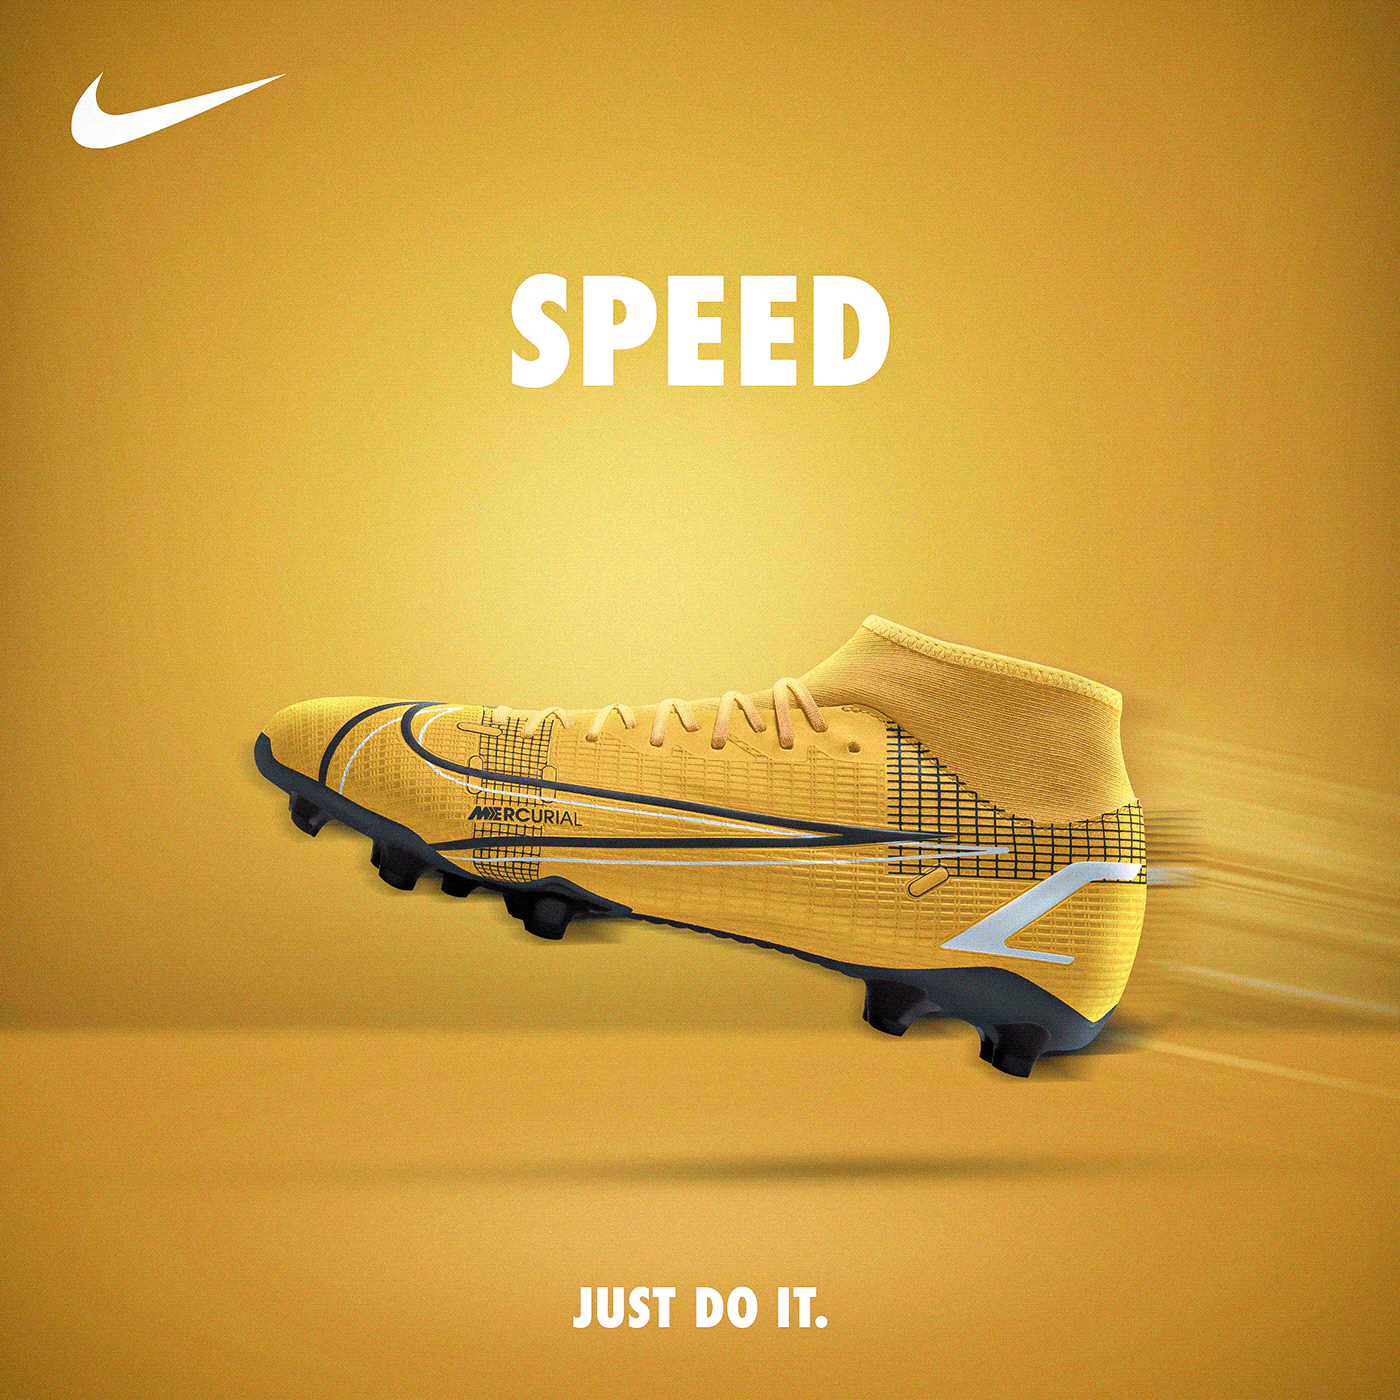 NIKE Football Boot Campaign (unofficial) on Behance